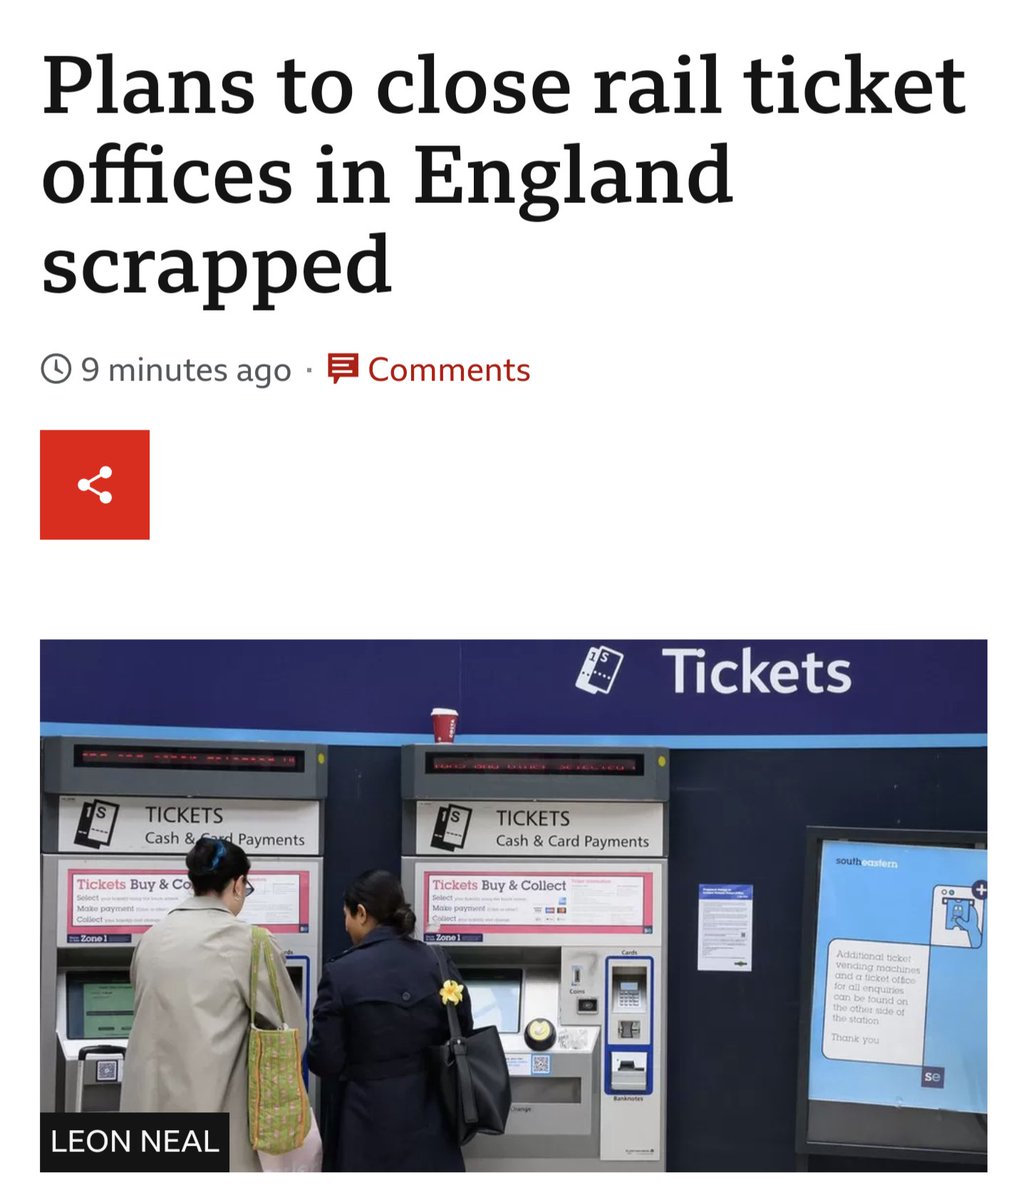 🎉 The government has abandoned their absurd plans to close #rail ticket offices. 🗣️ This is good news for disabled passengers, the elderly - in fact anyone that likes human contact! 🚉 Now it's time to focus on improving our #railways to get more people travelling by train.